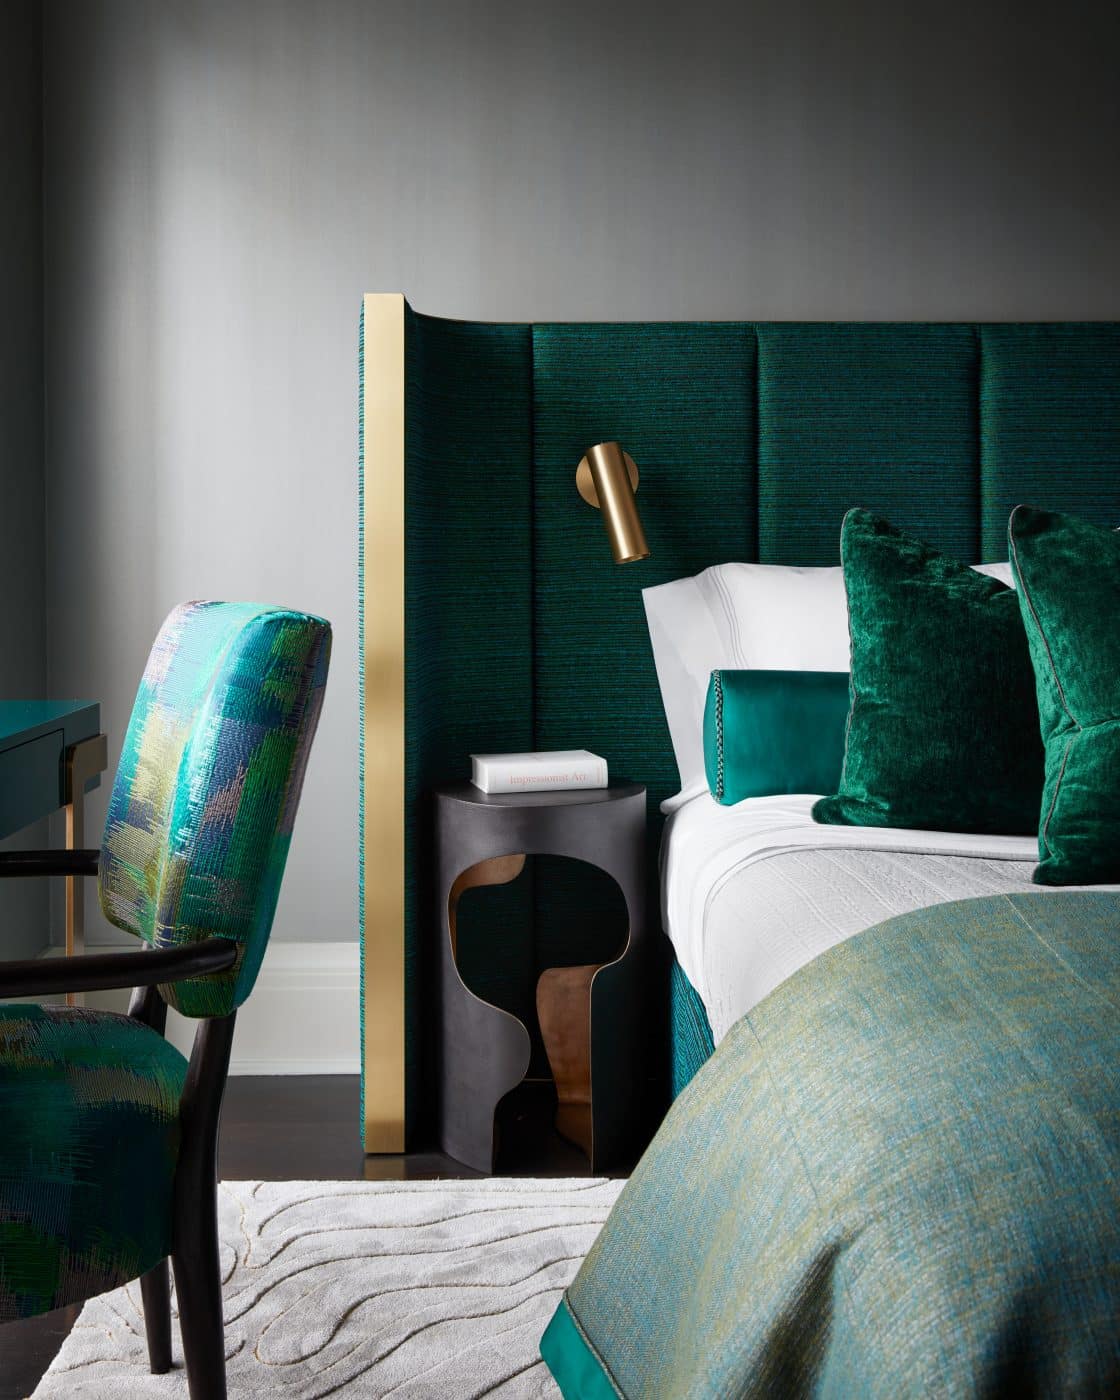 Emerald-hued guest bedroom of Manhattan apartment designed by Drake/Anderson's Caleb Anderson Jamie Drake with curving headboard and nightstands